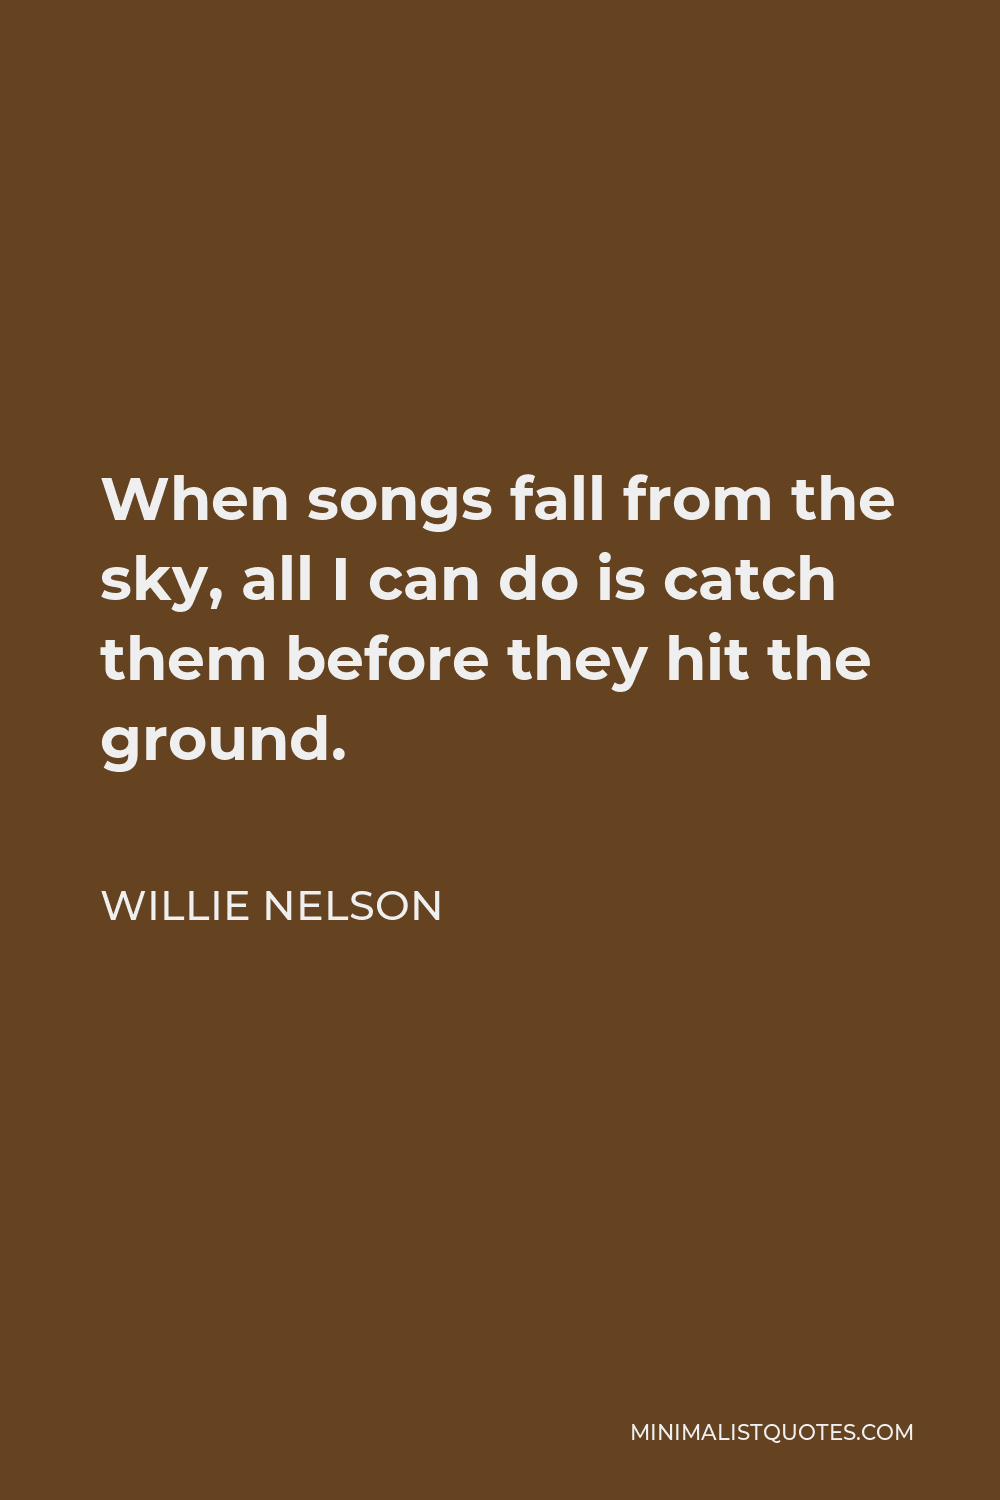 Willie Nelson Quote - When songs fall from the sky, all I can do is catch them before they hit the ground.